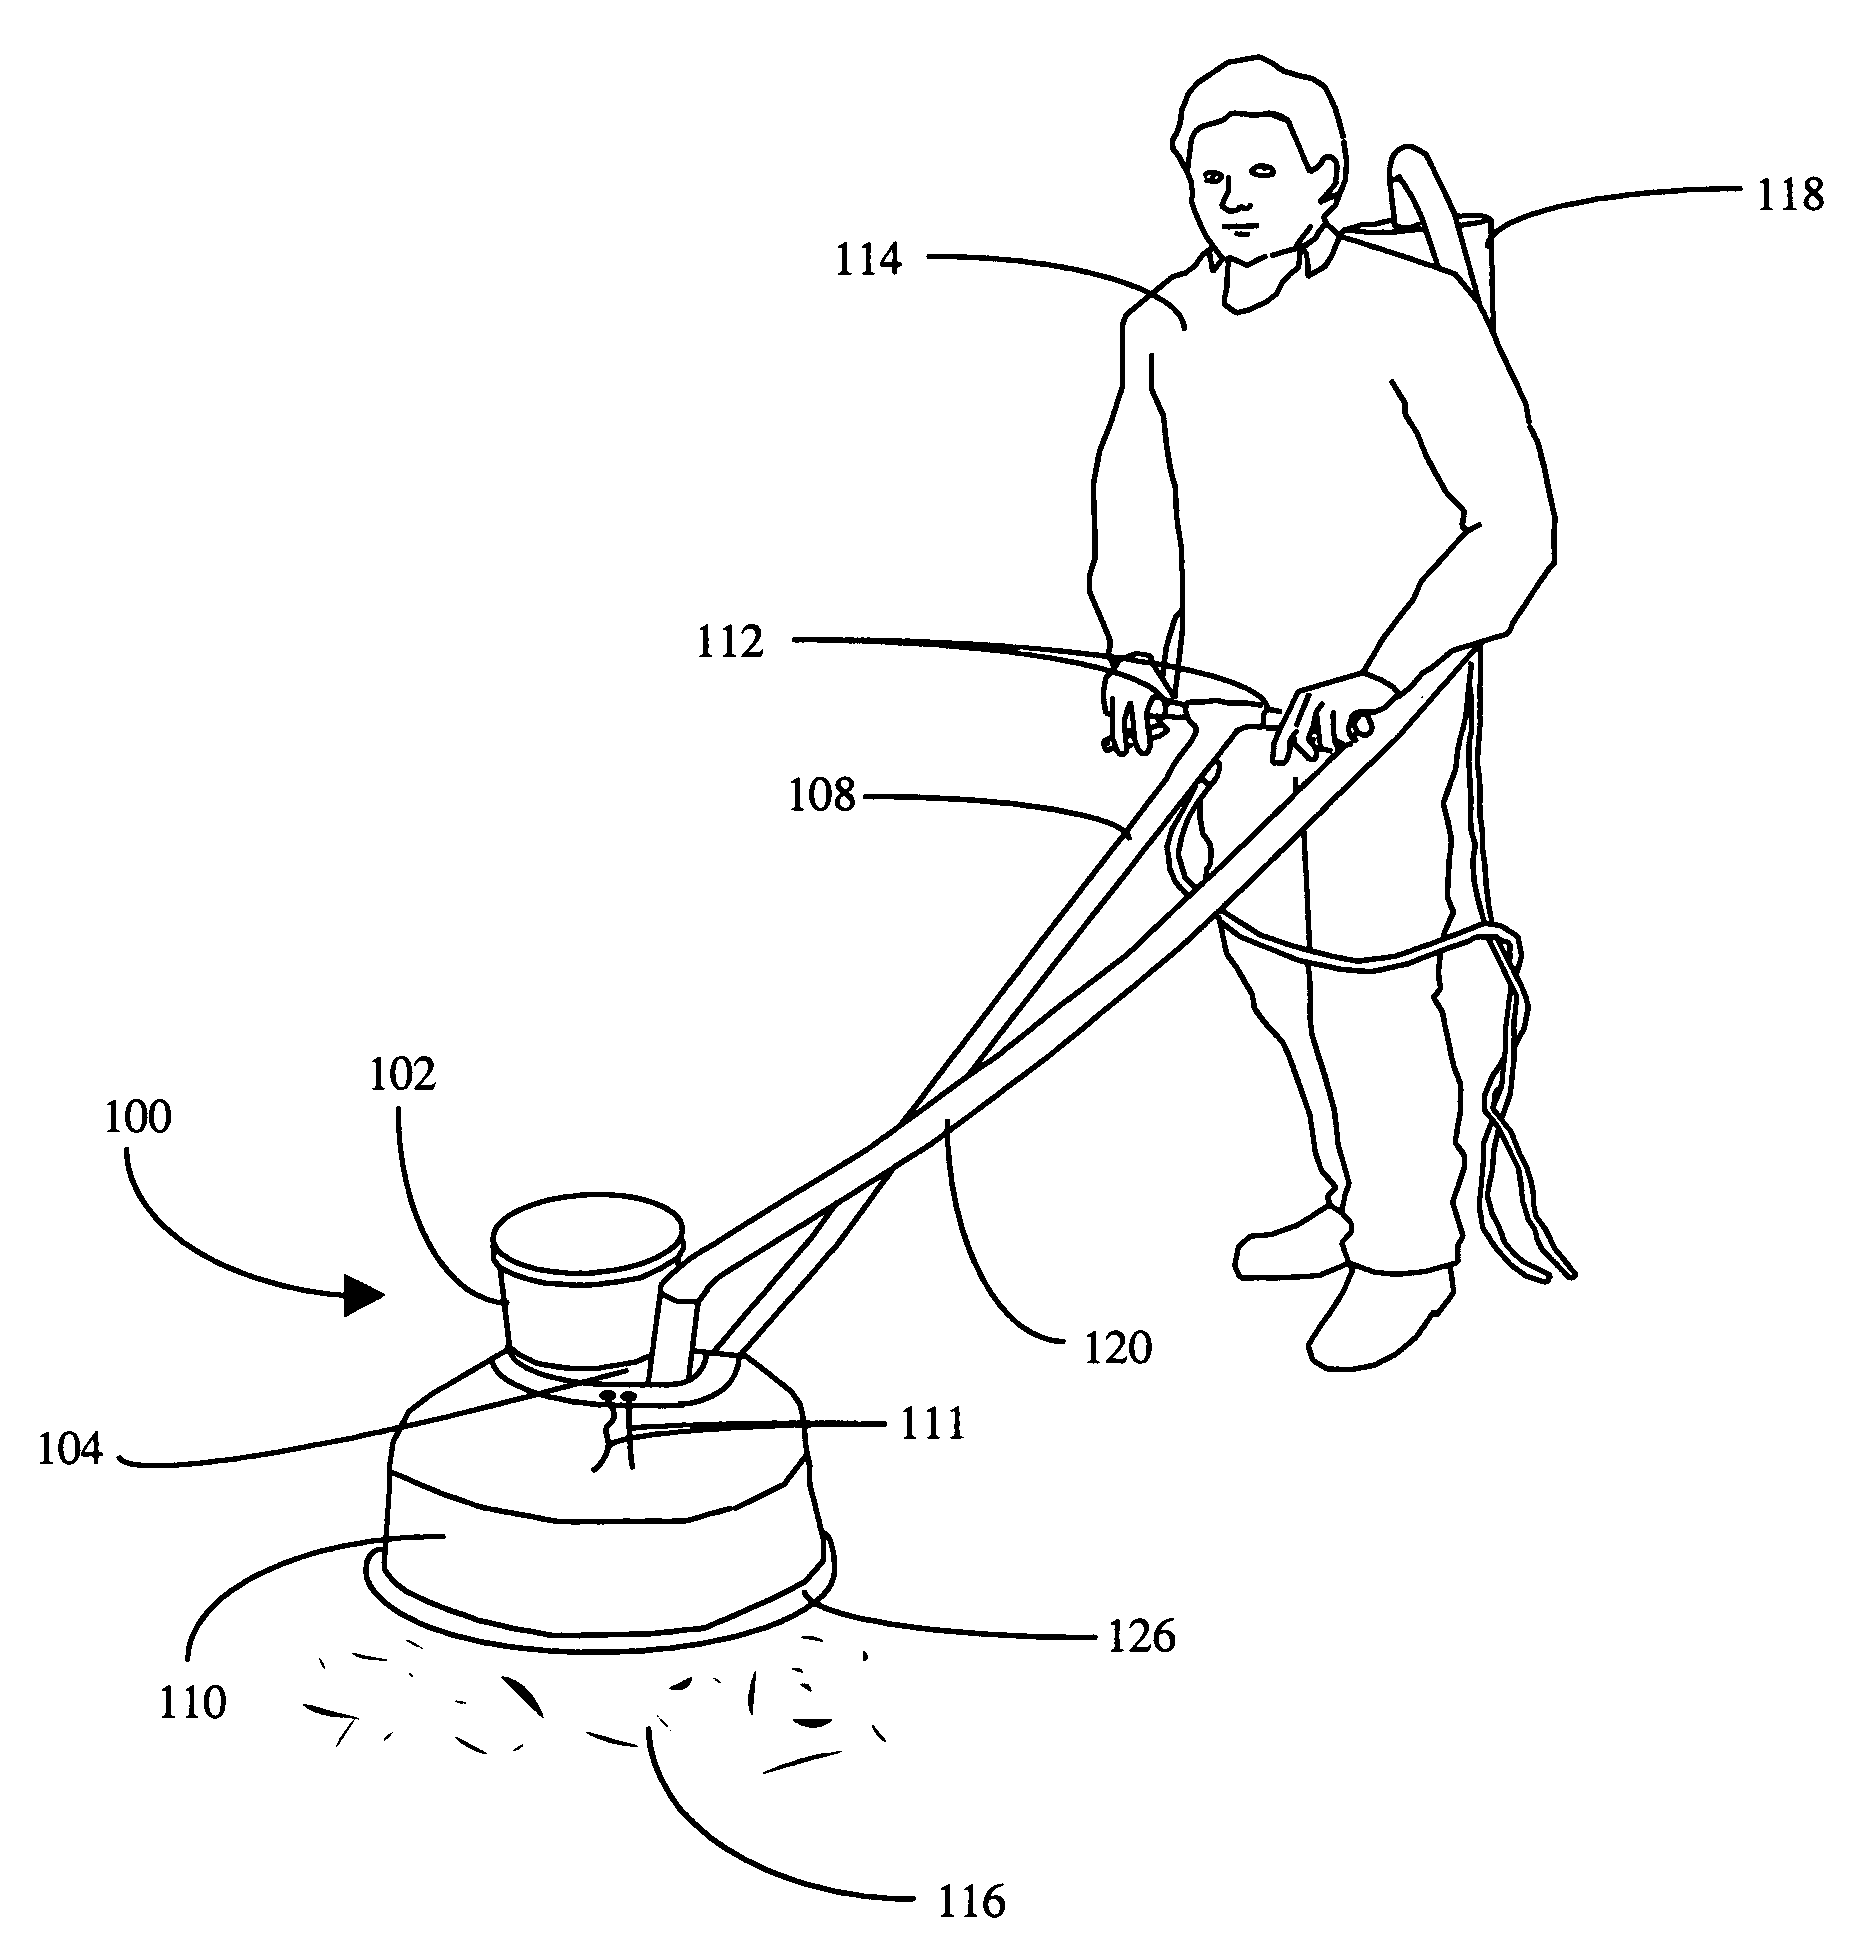 Dust containment device for surfacing machines